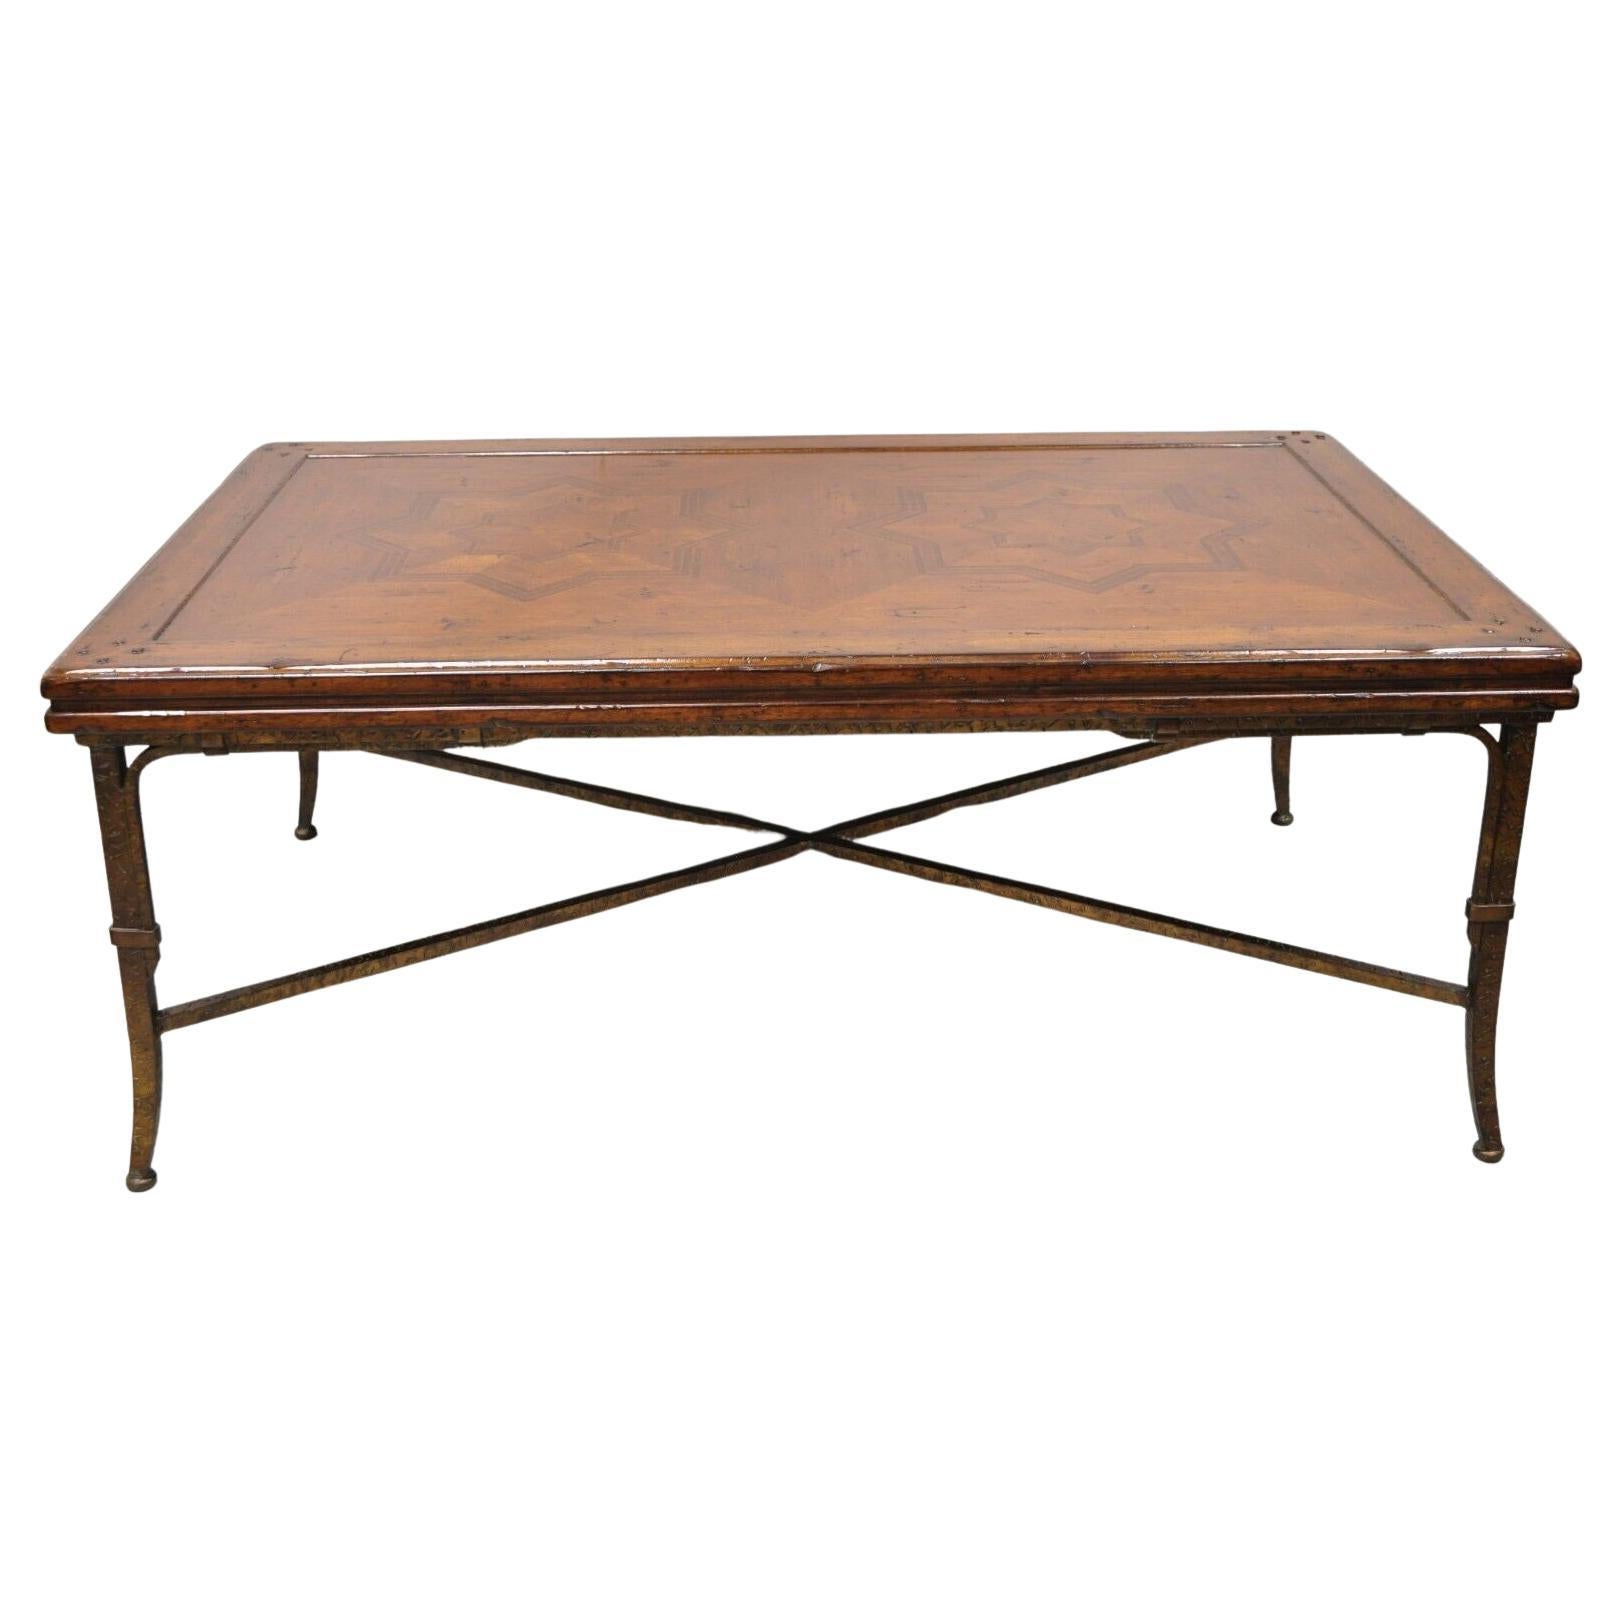 Italian Mediterranean Style Marquetry Inlay Maitland Smith Style Coffee Table For Sale